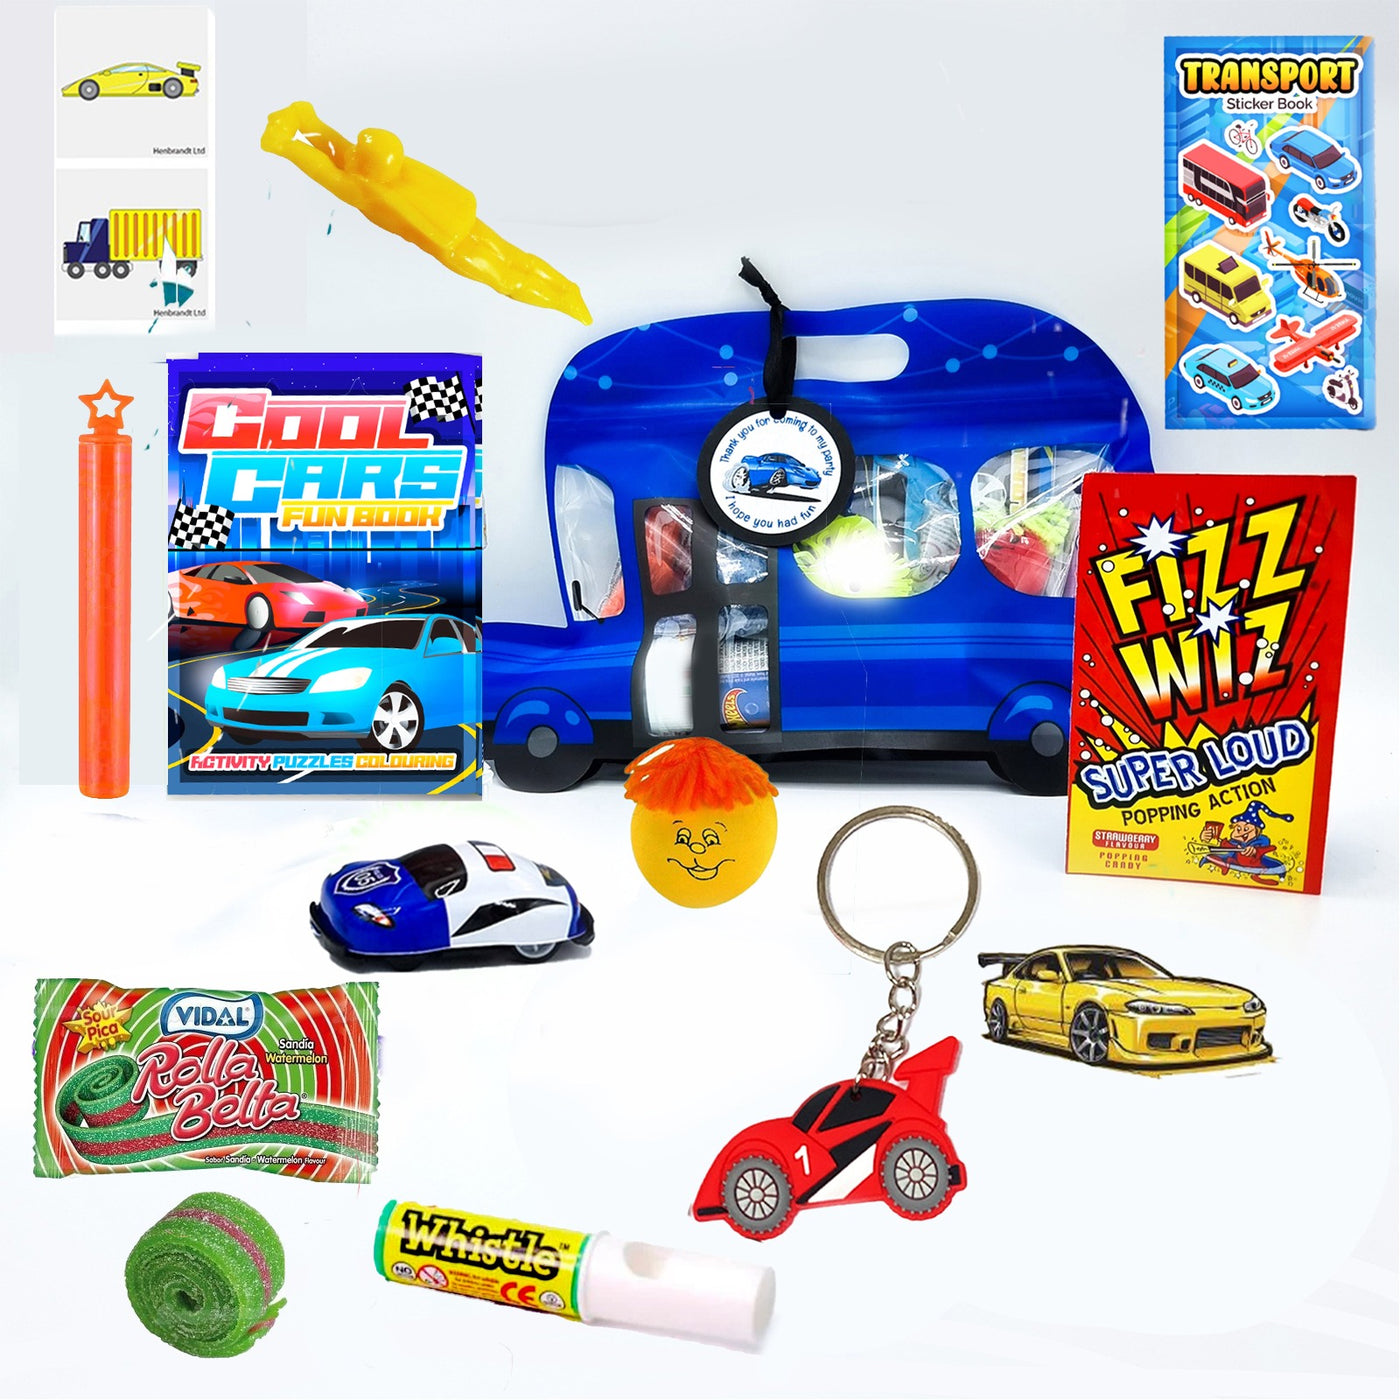 Children's Pre Filled Blue Cars Party Goody Bags With Toys And Sweets, Bus Transport Party Favours For Boys.